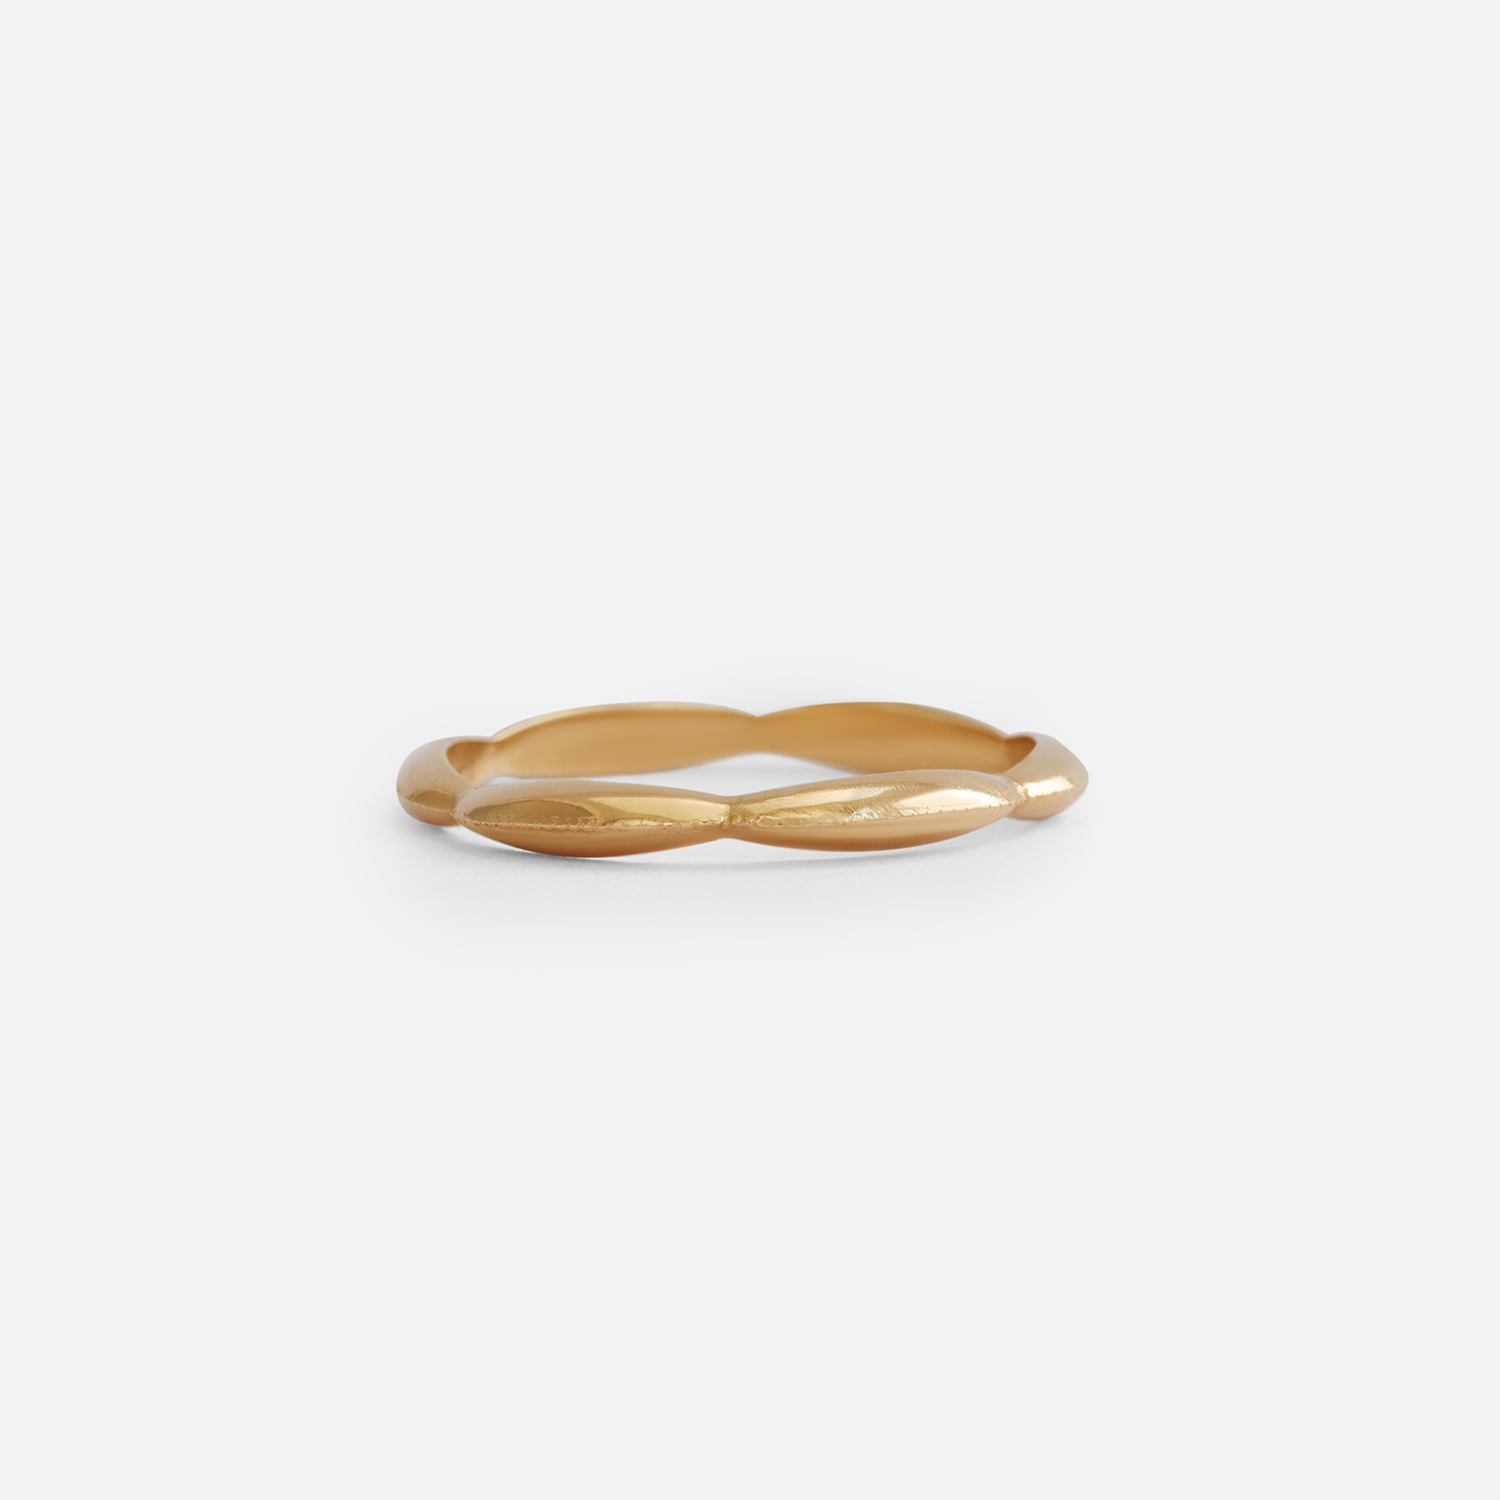 Romantic Array / Scallop Band By Ruowei